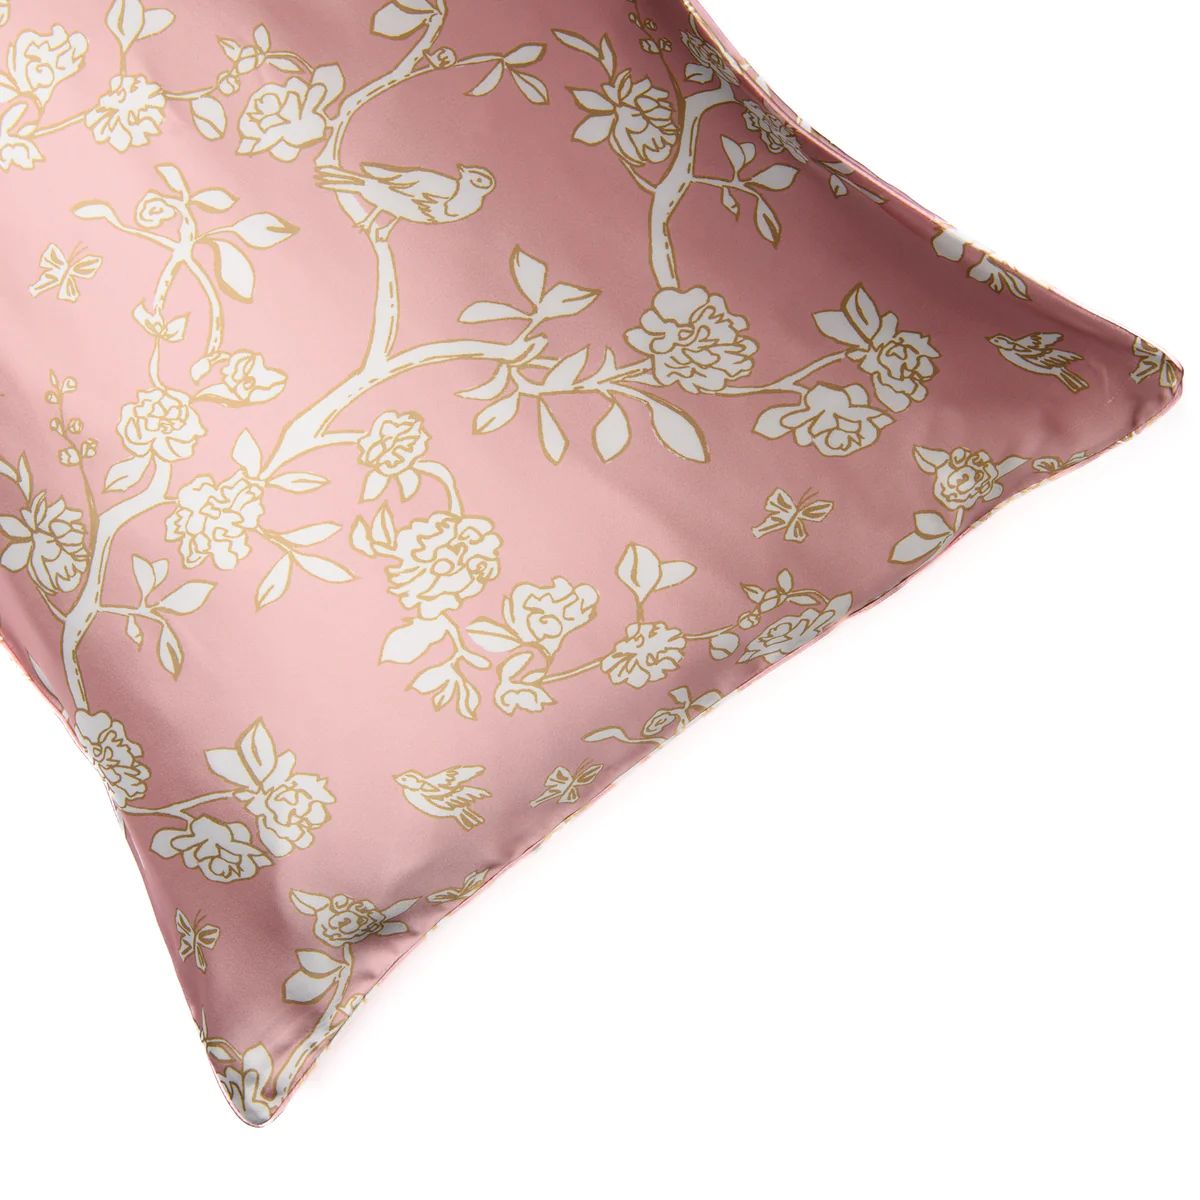 Chinoiserie Satin Pillowcase | Over The Moon Gift